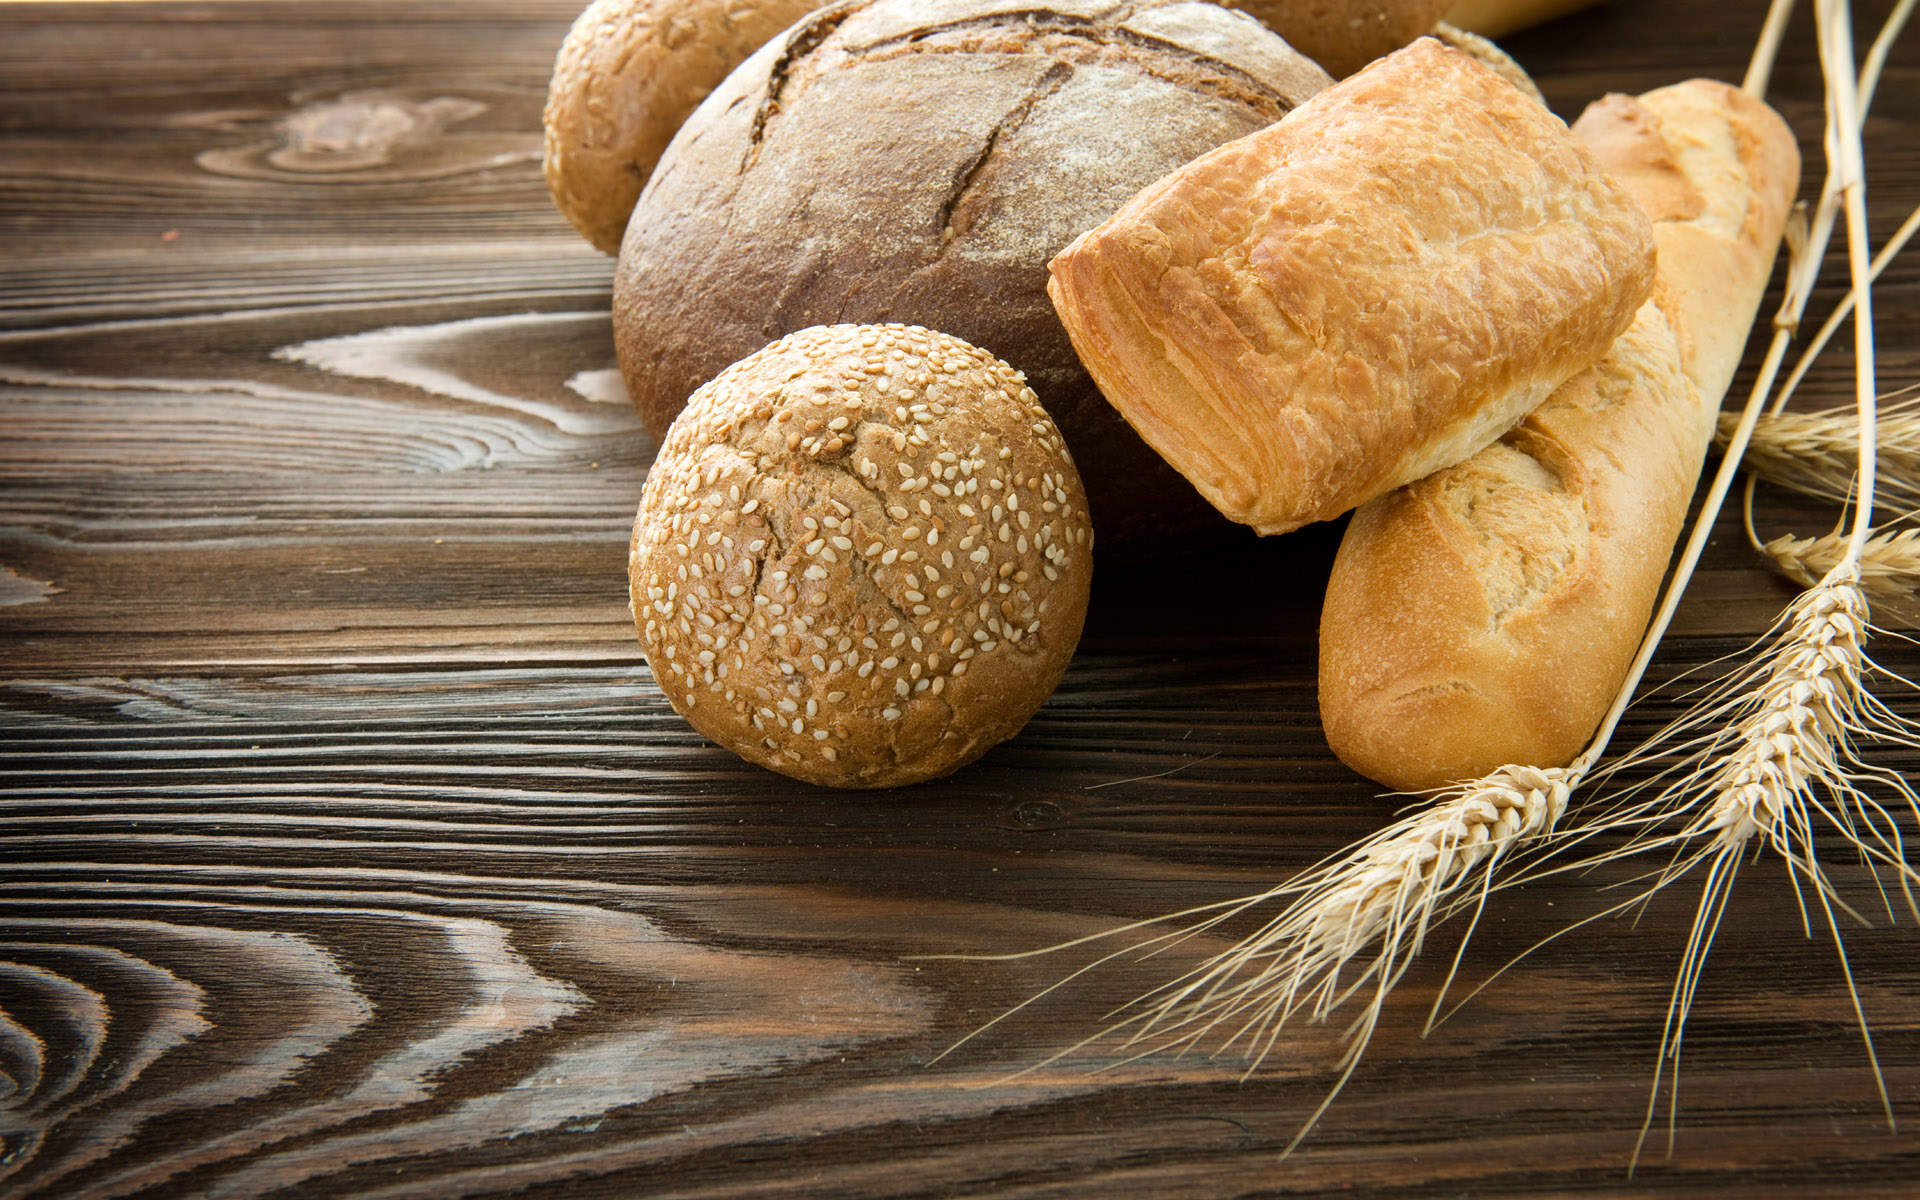 Bread Cool Wallpaper Imageearch Audio Coolwallpaper